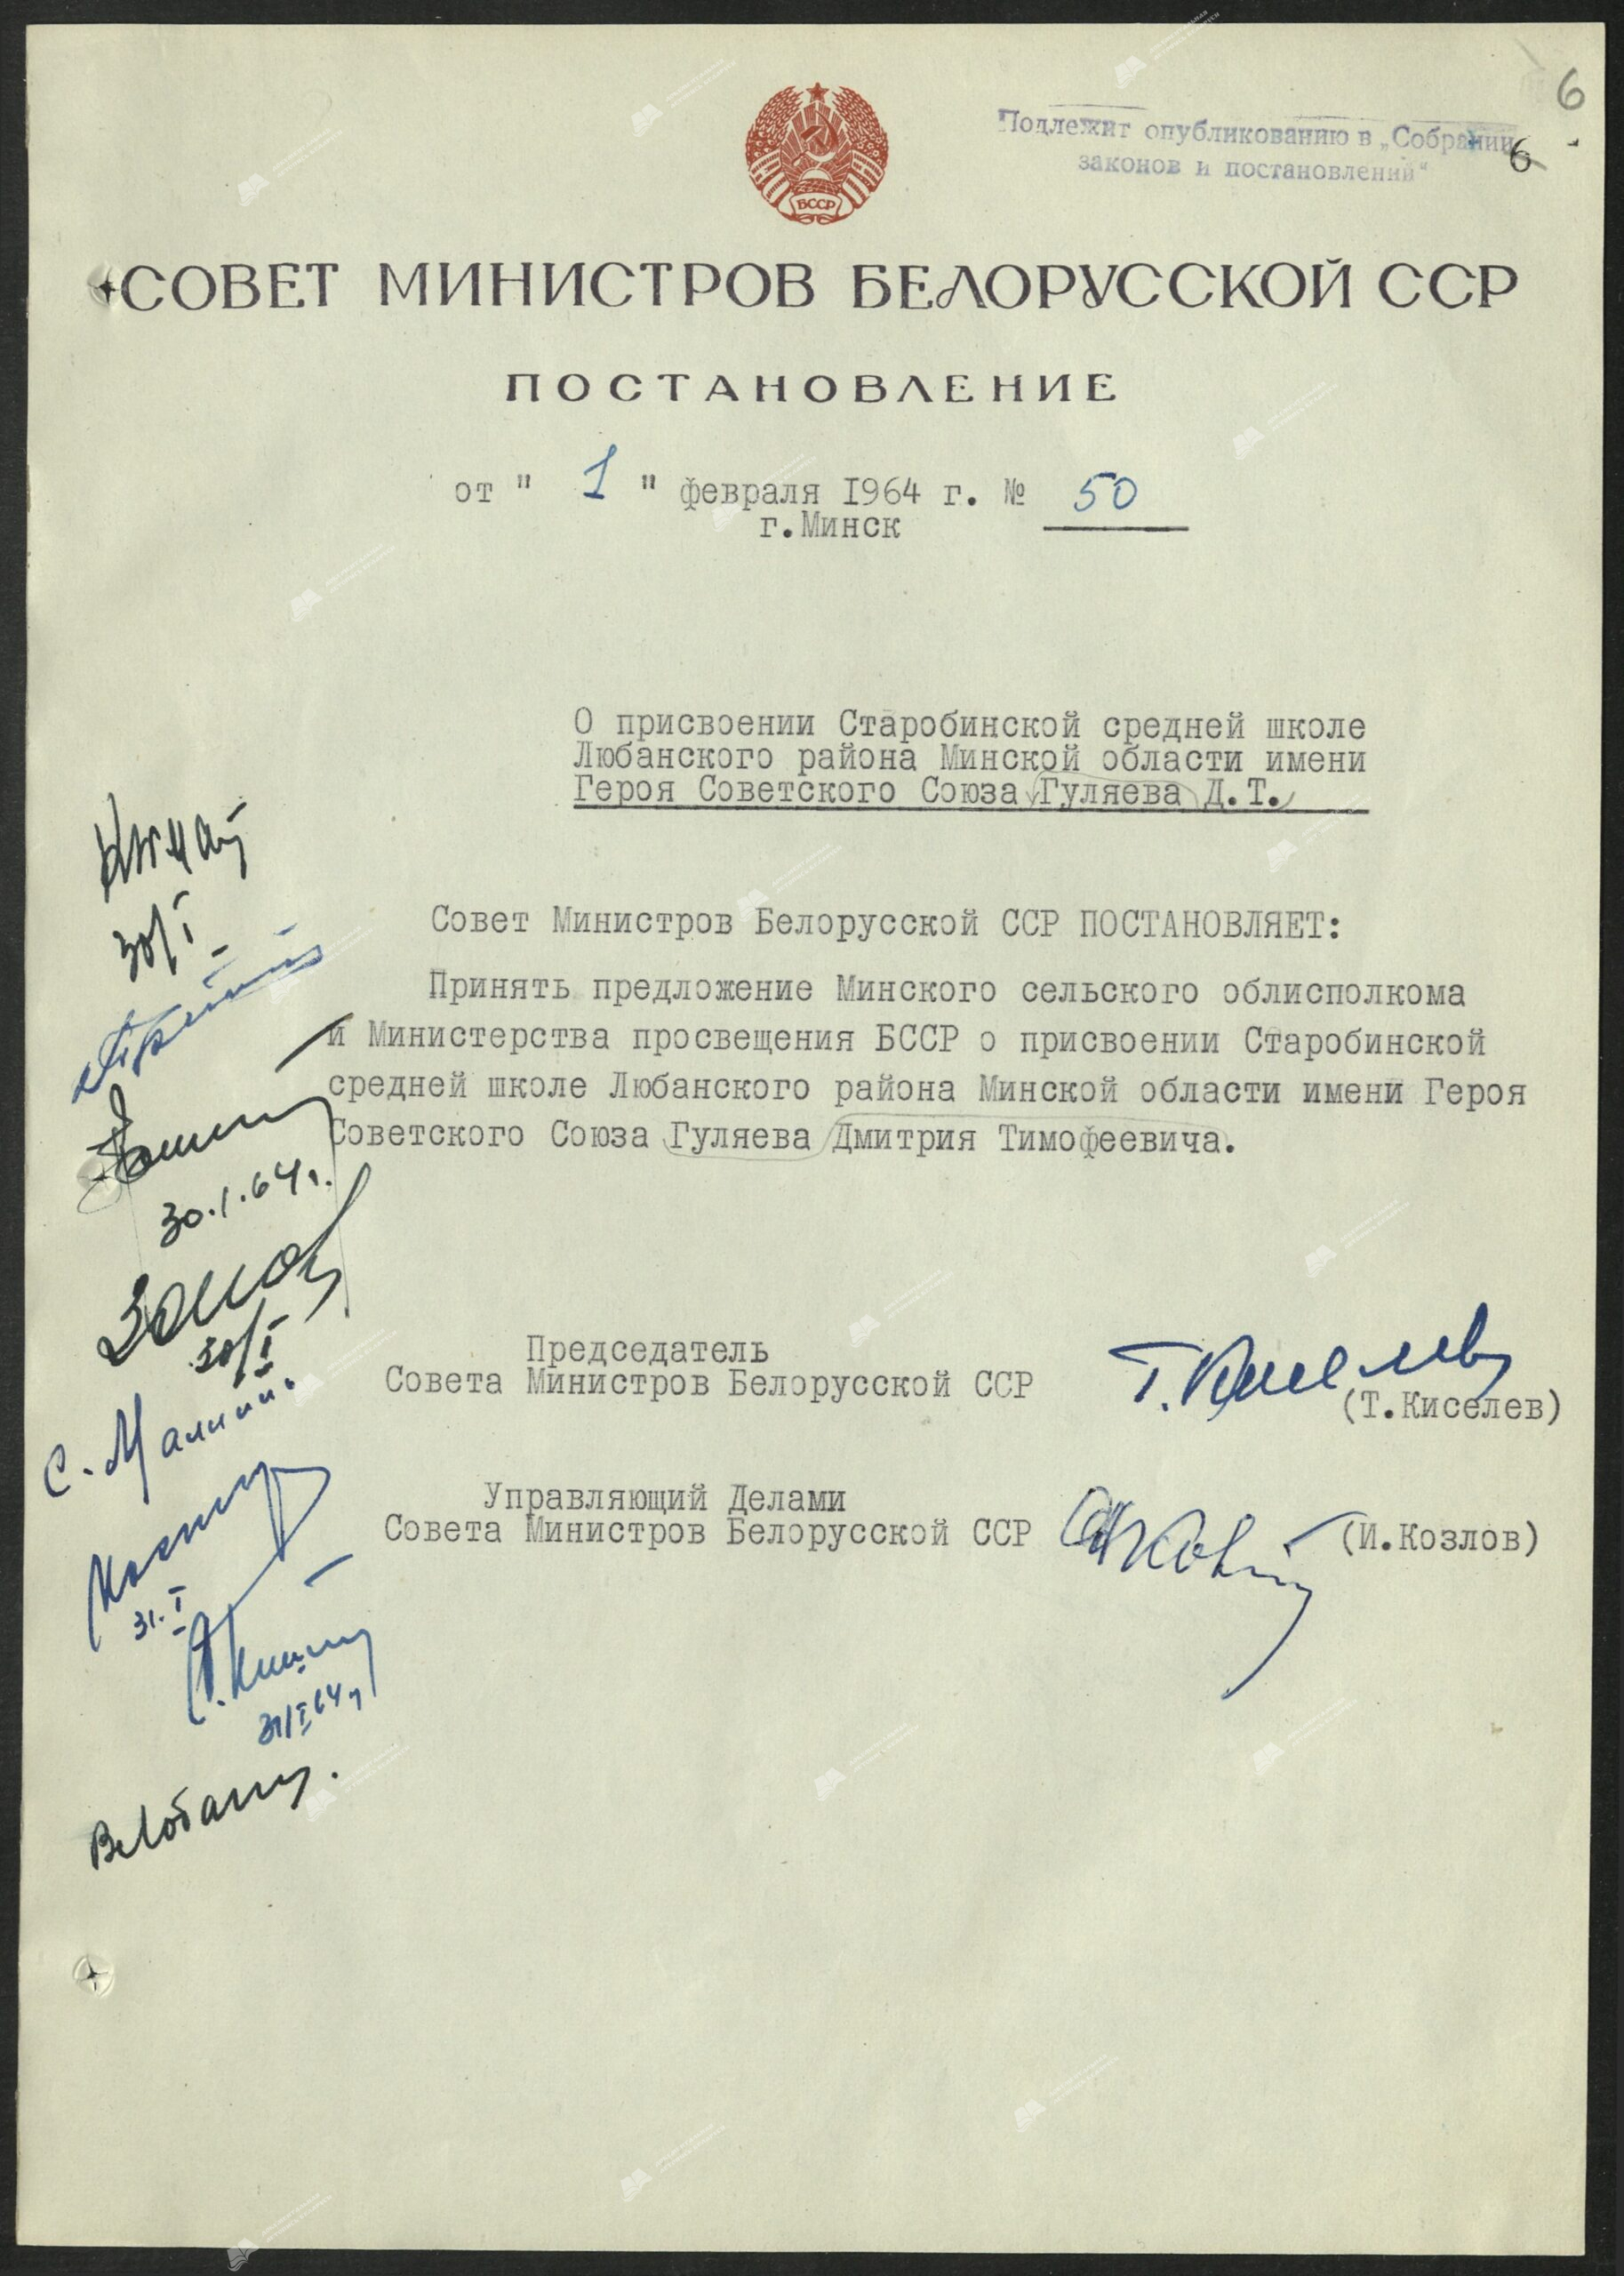 Resolution No. 50 of the Council of Ministers of the BSSR «On naming the Starobinskaya secondary school of the Lyuban district of the Minsk region after the Hero of the Soviet Union D. T. Gulyaev»-с. 0